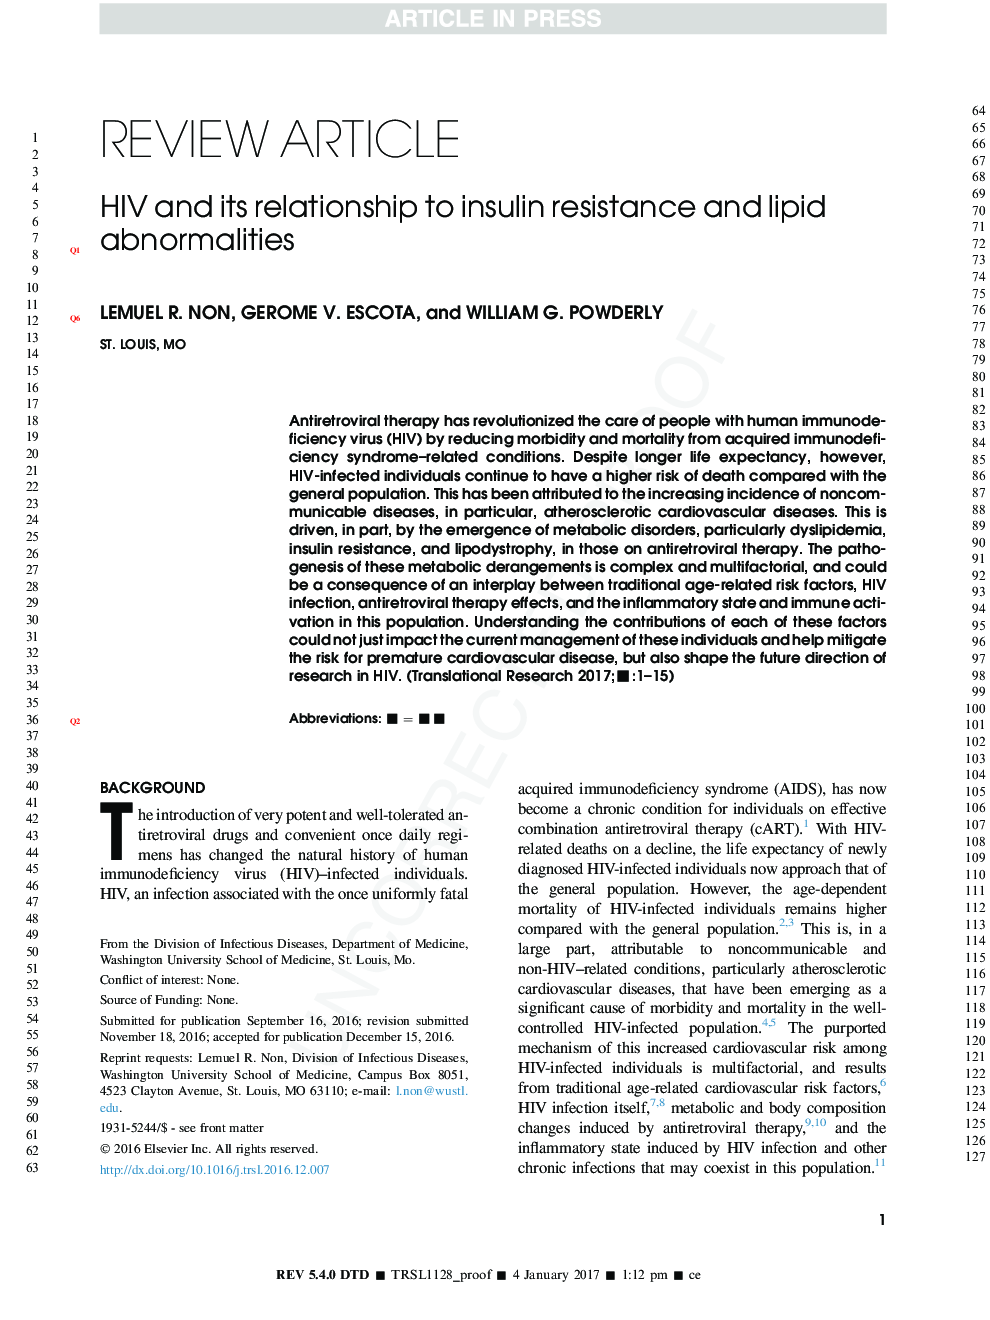 HIV and its relationship to insulin resistance and lipid abnormalities